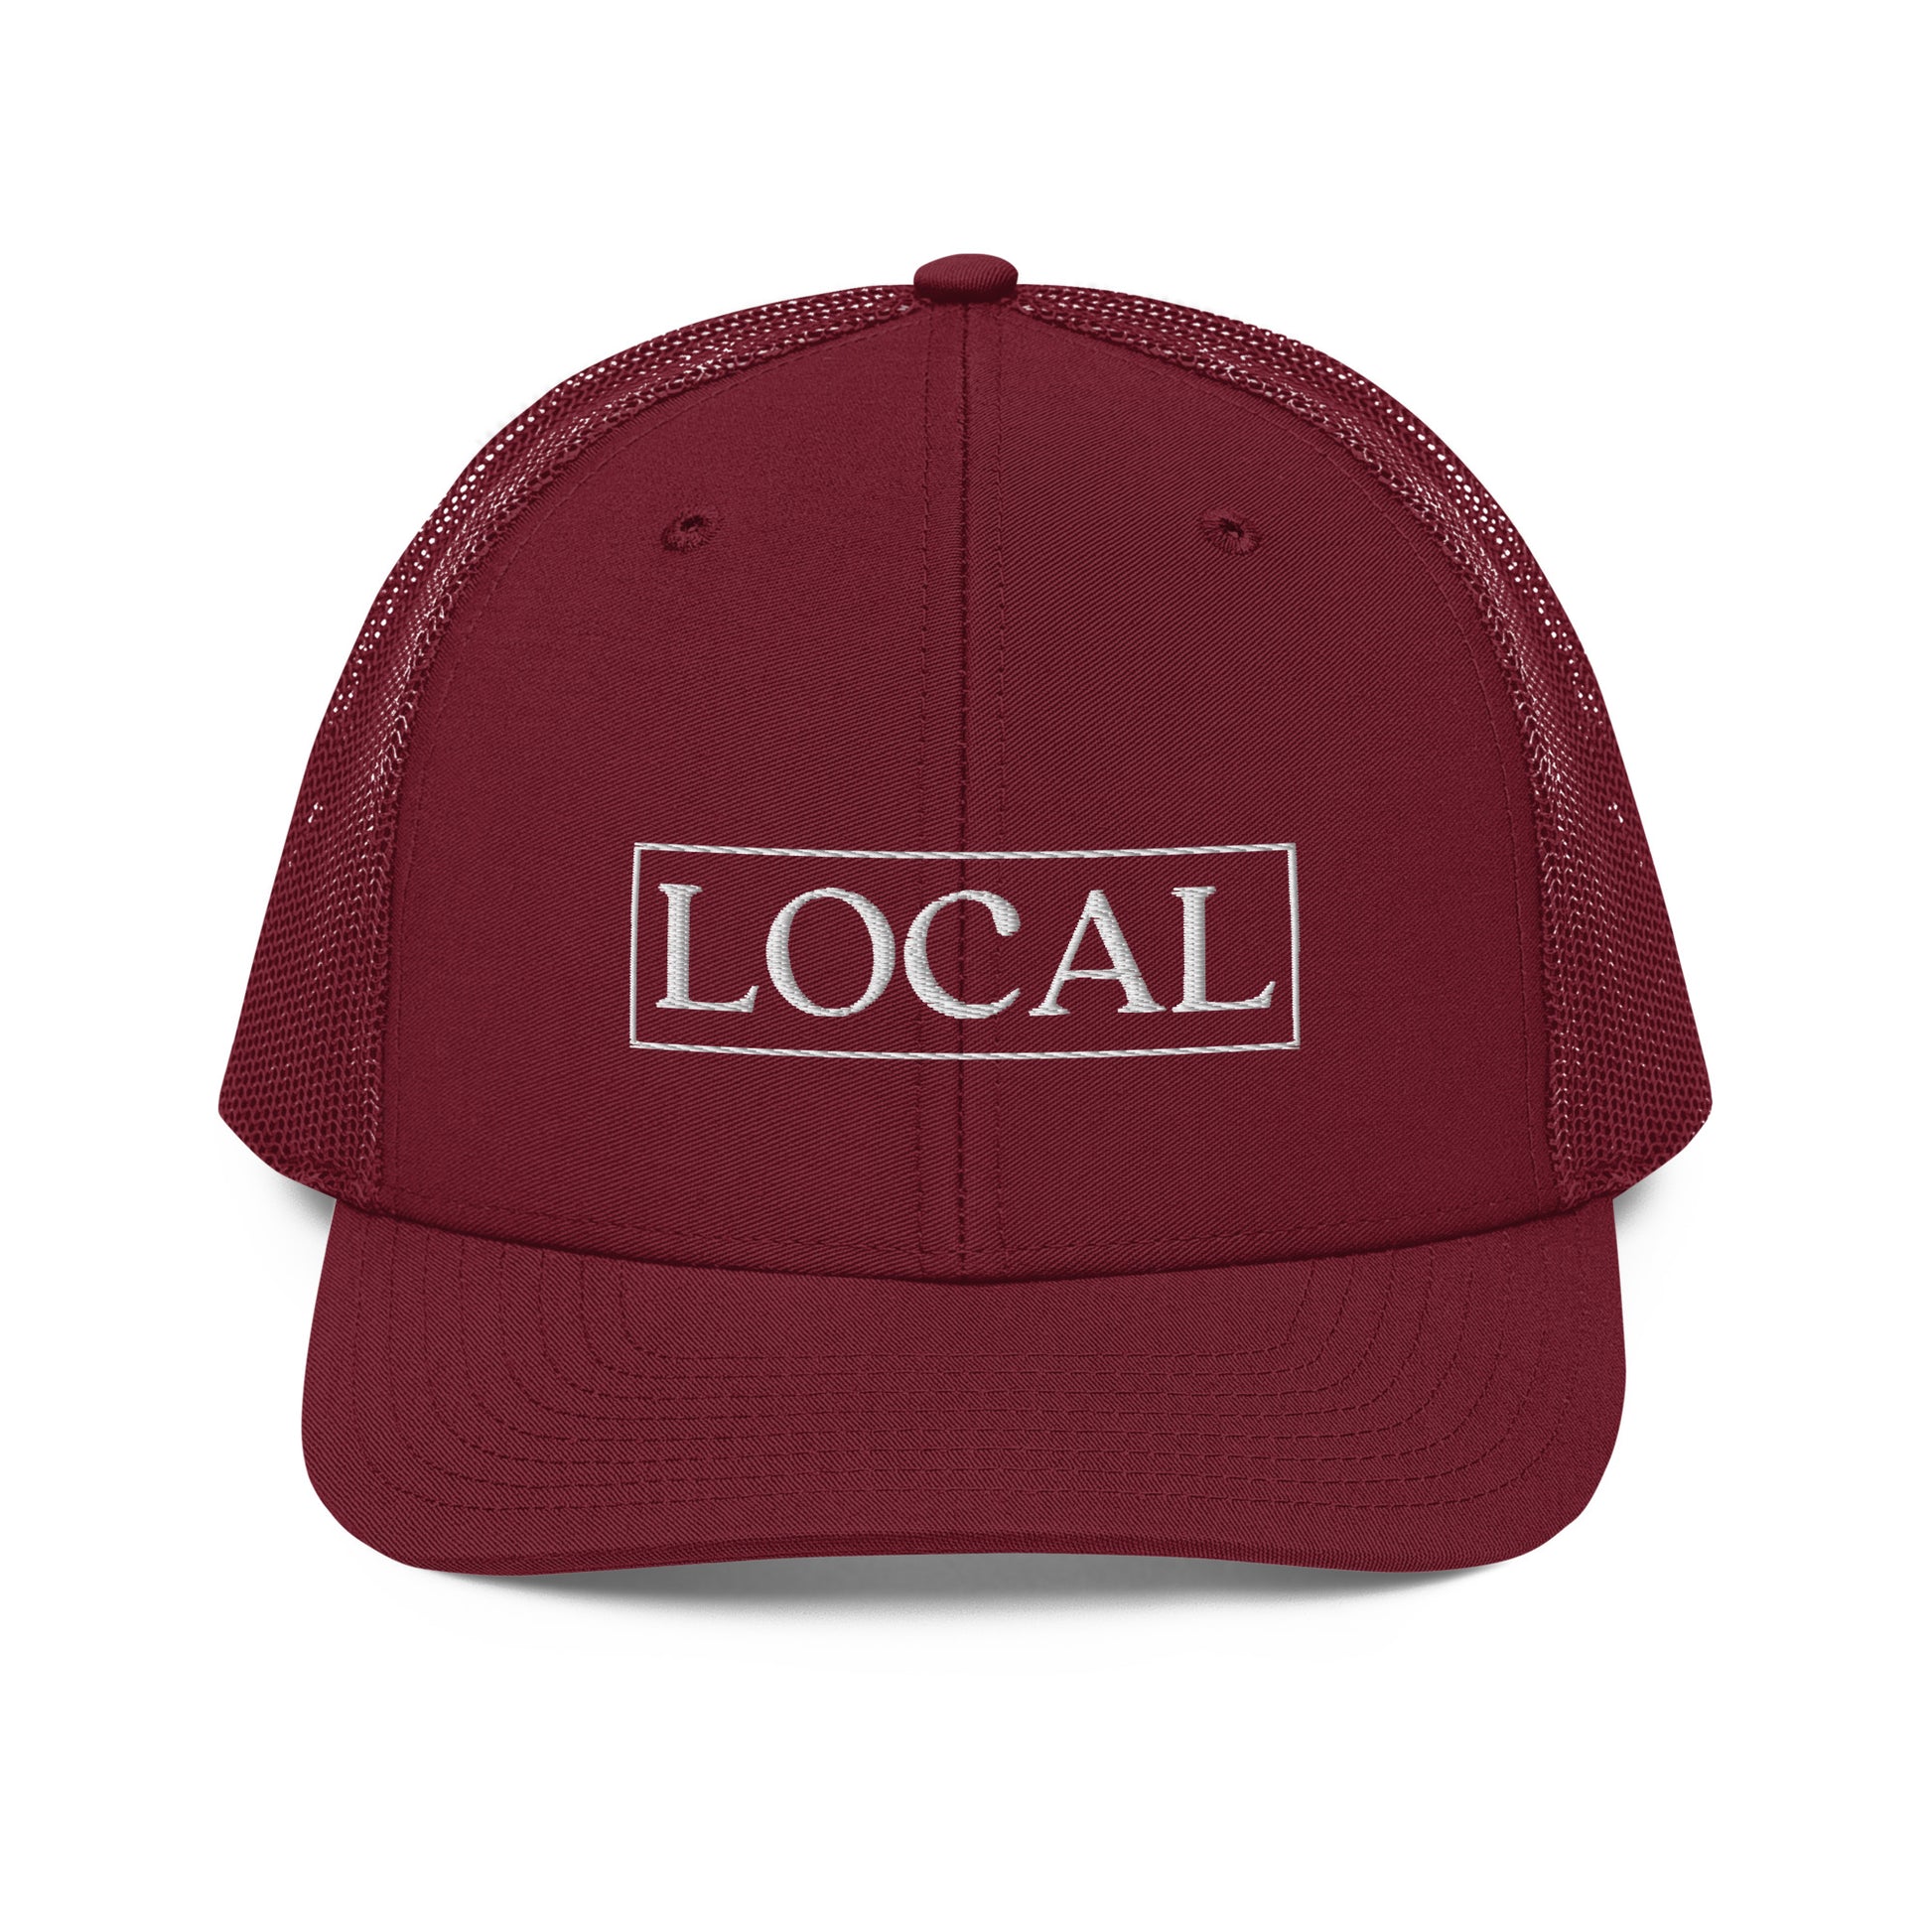 Local Florida Hat - Red